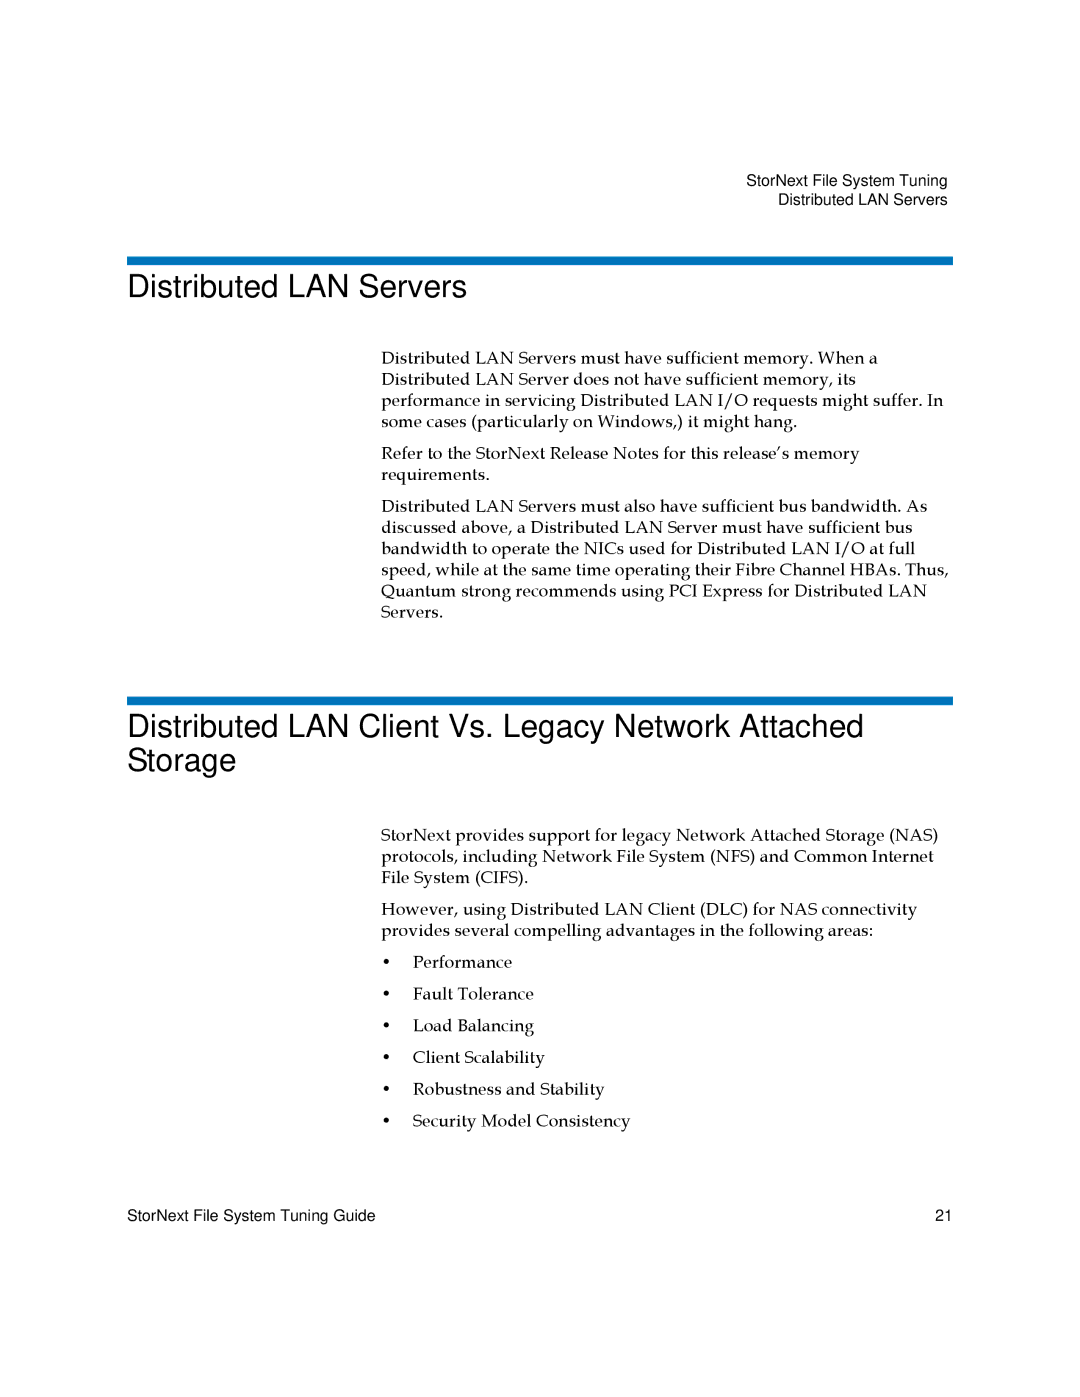 Quantum 6-01376-07 manual Distributed LAN Servers, Distributed LAN Client Vs. Legacy Network Attached Storage 